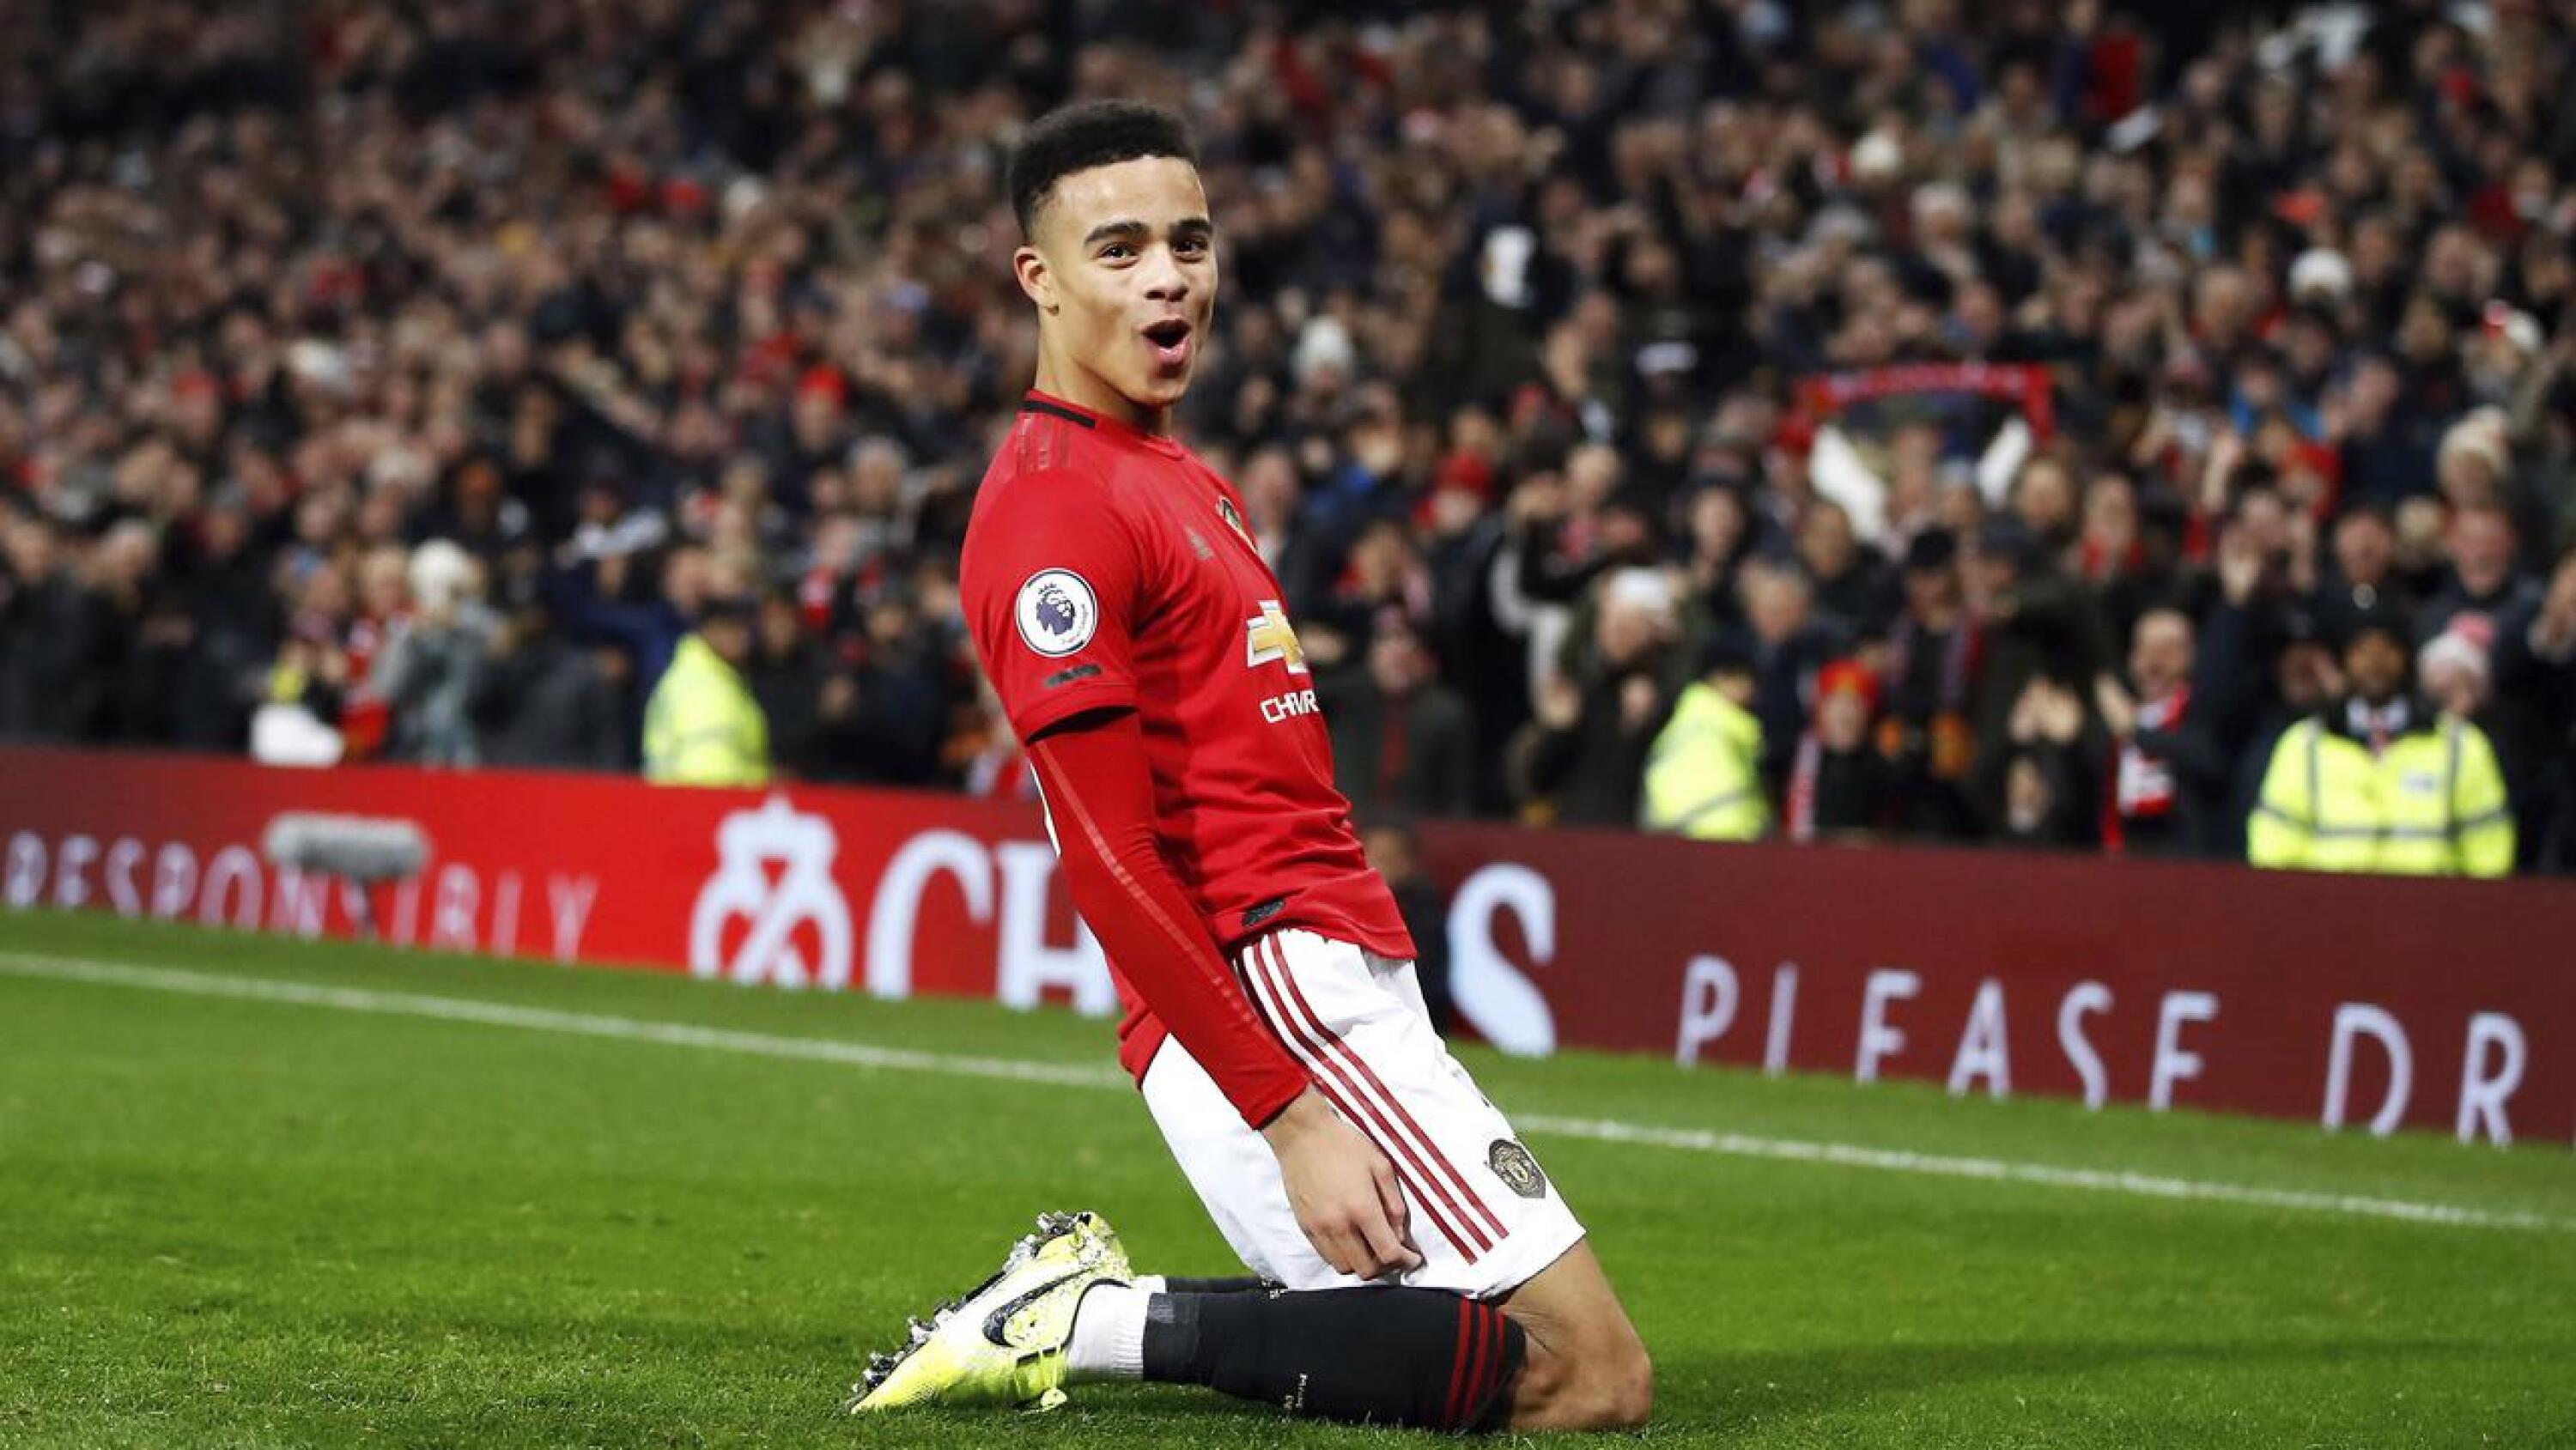 Manchester United's Mason Greenwood celebrates after scoring against Newcastle United at Old Trafford in December